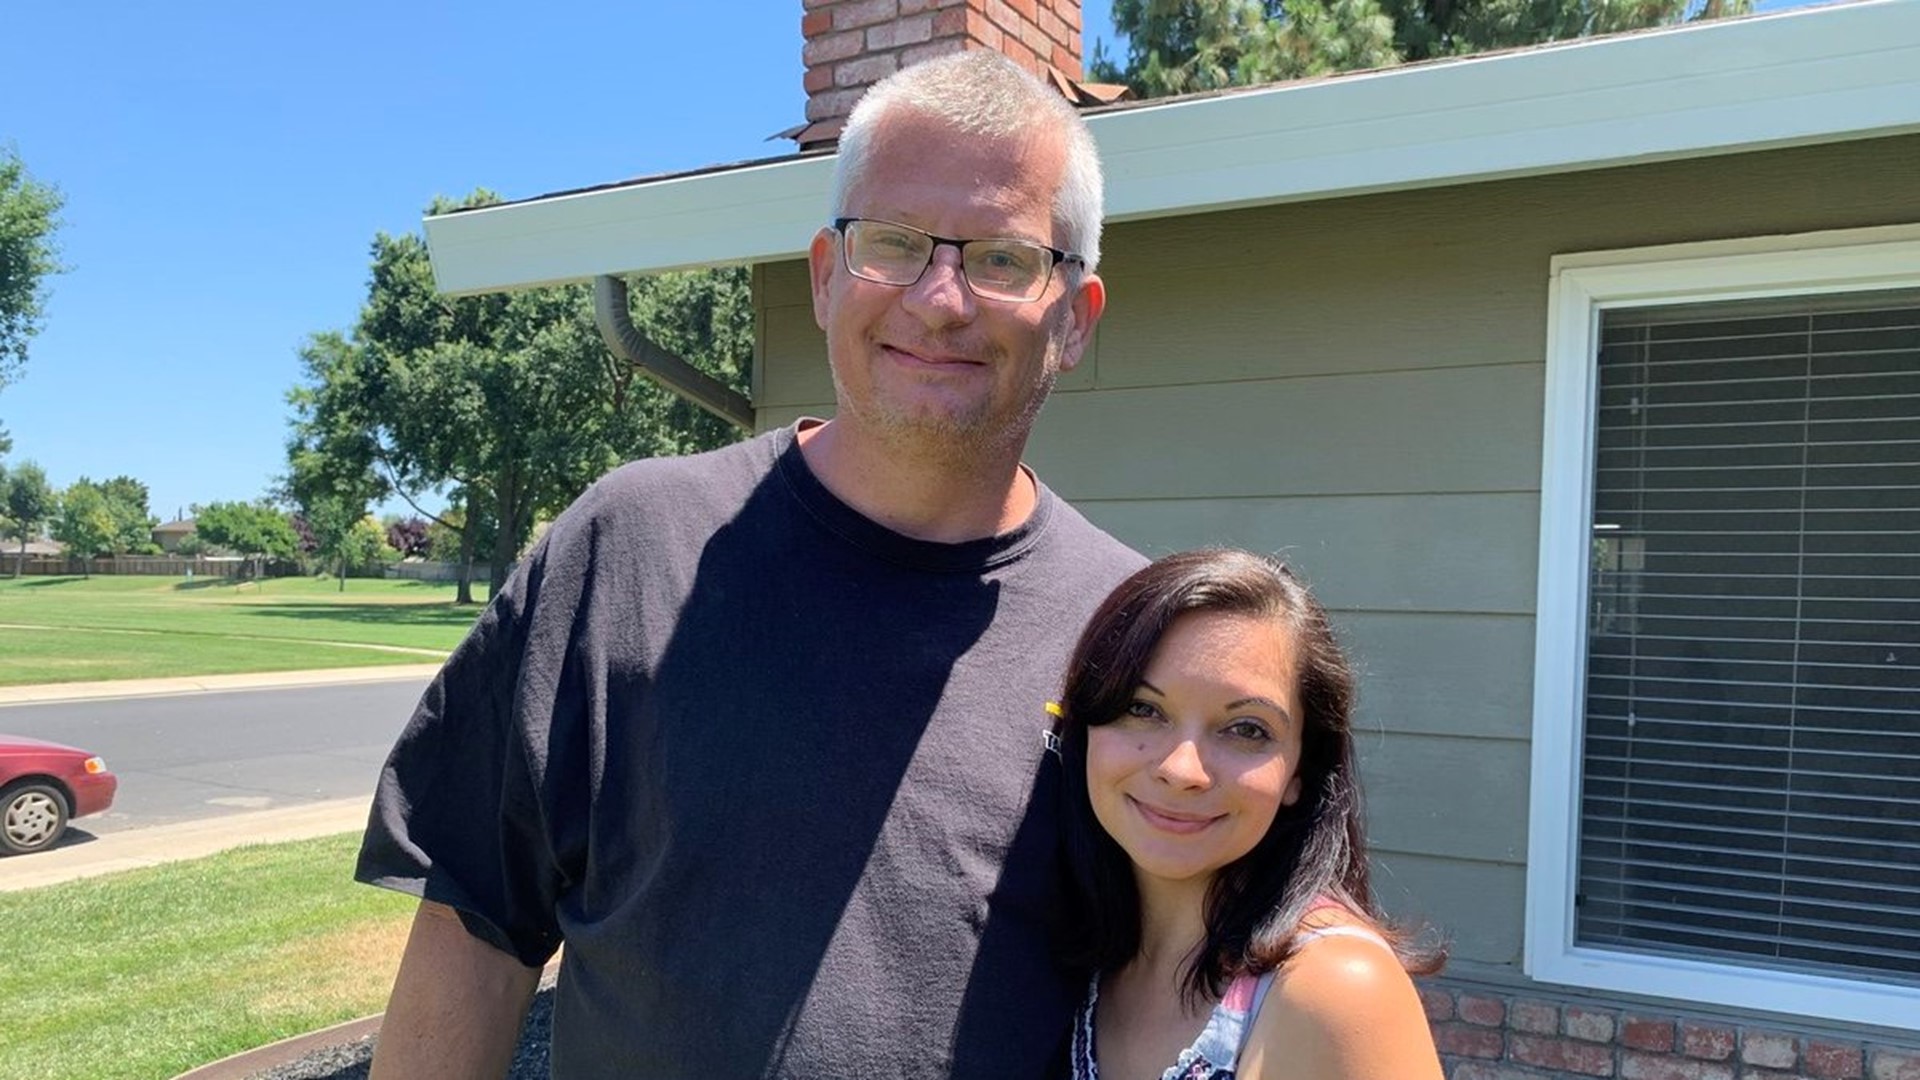 46-year-old Clifton Vannorsdall has been battling stage 3 kidney disease since 2014. When his daughter's co-worker found out she had the same blood type, she immediately signed up to donate a kidney, without having ever met Clifton.